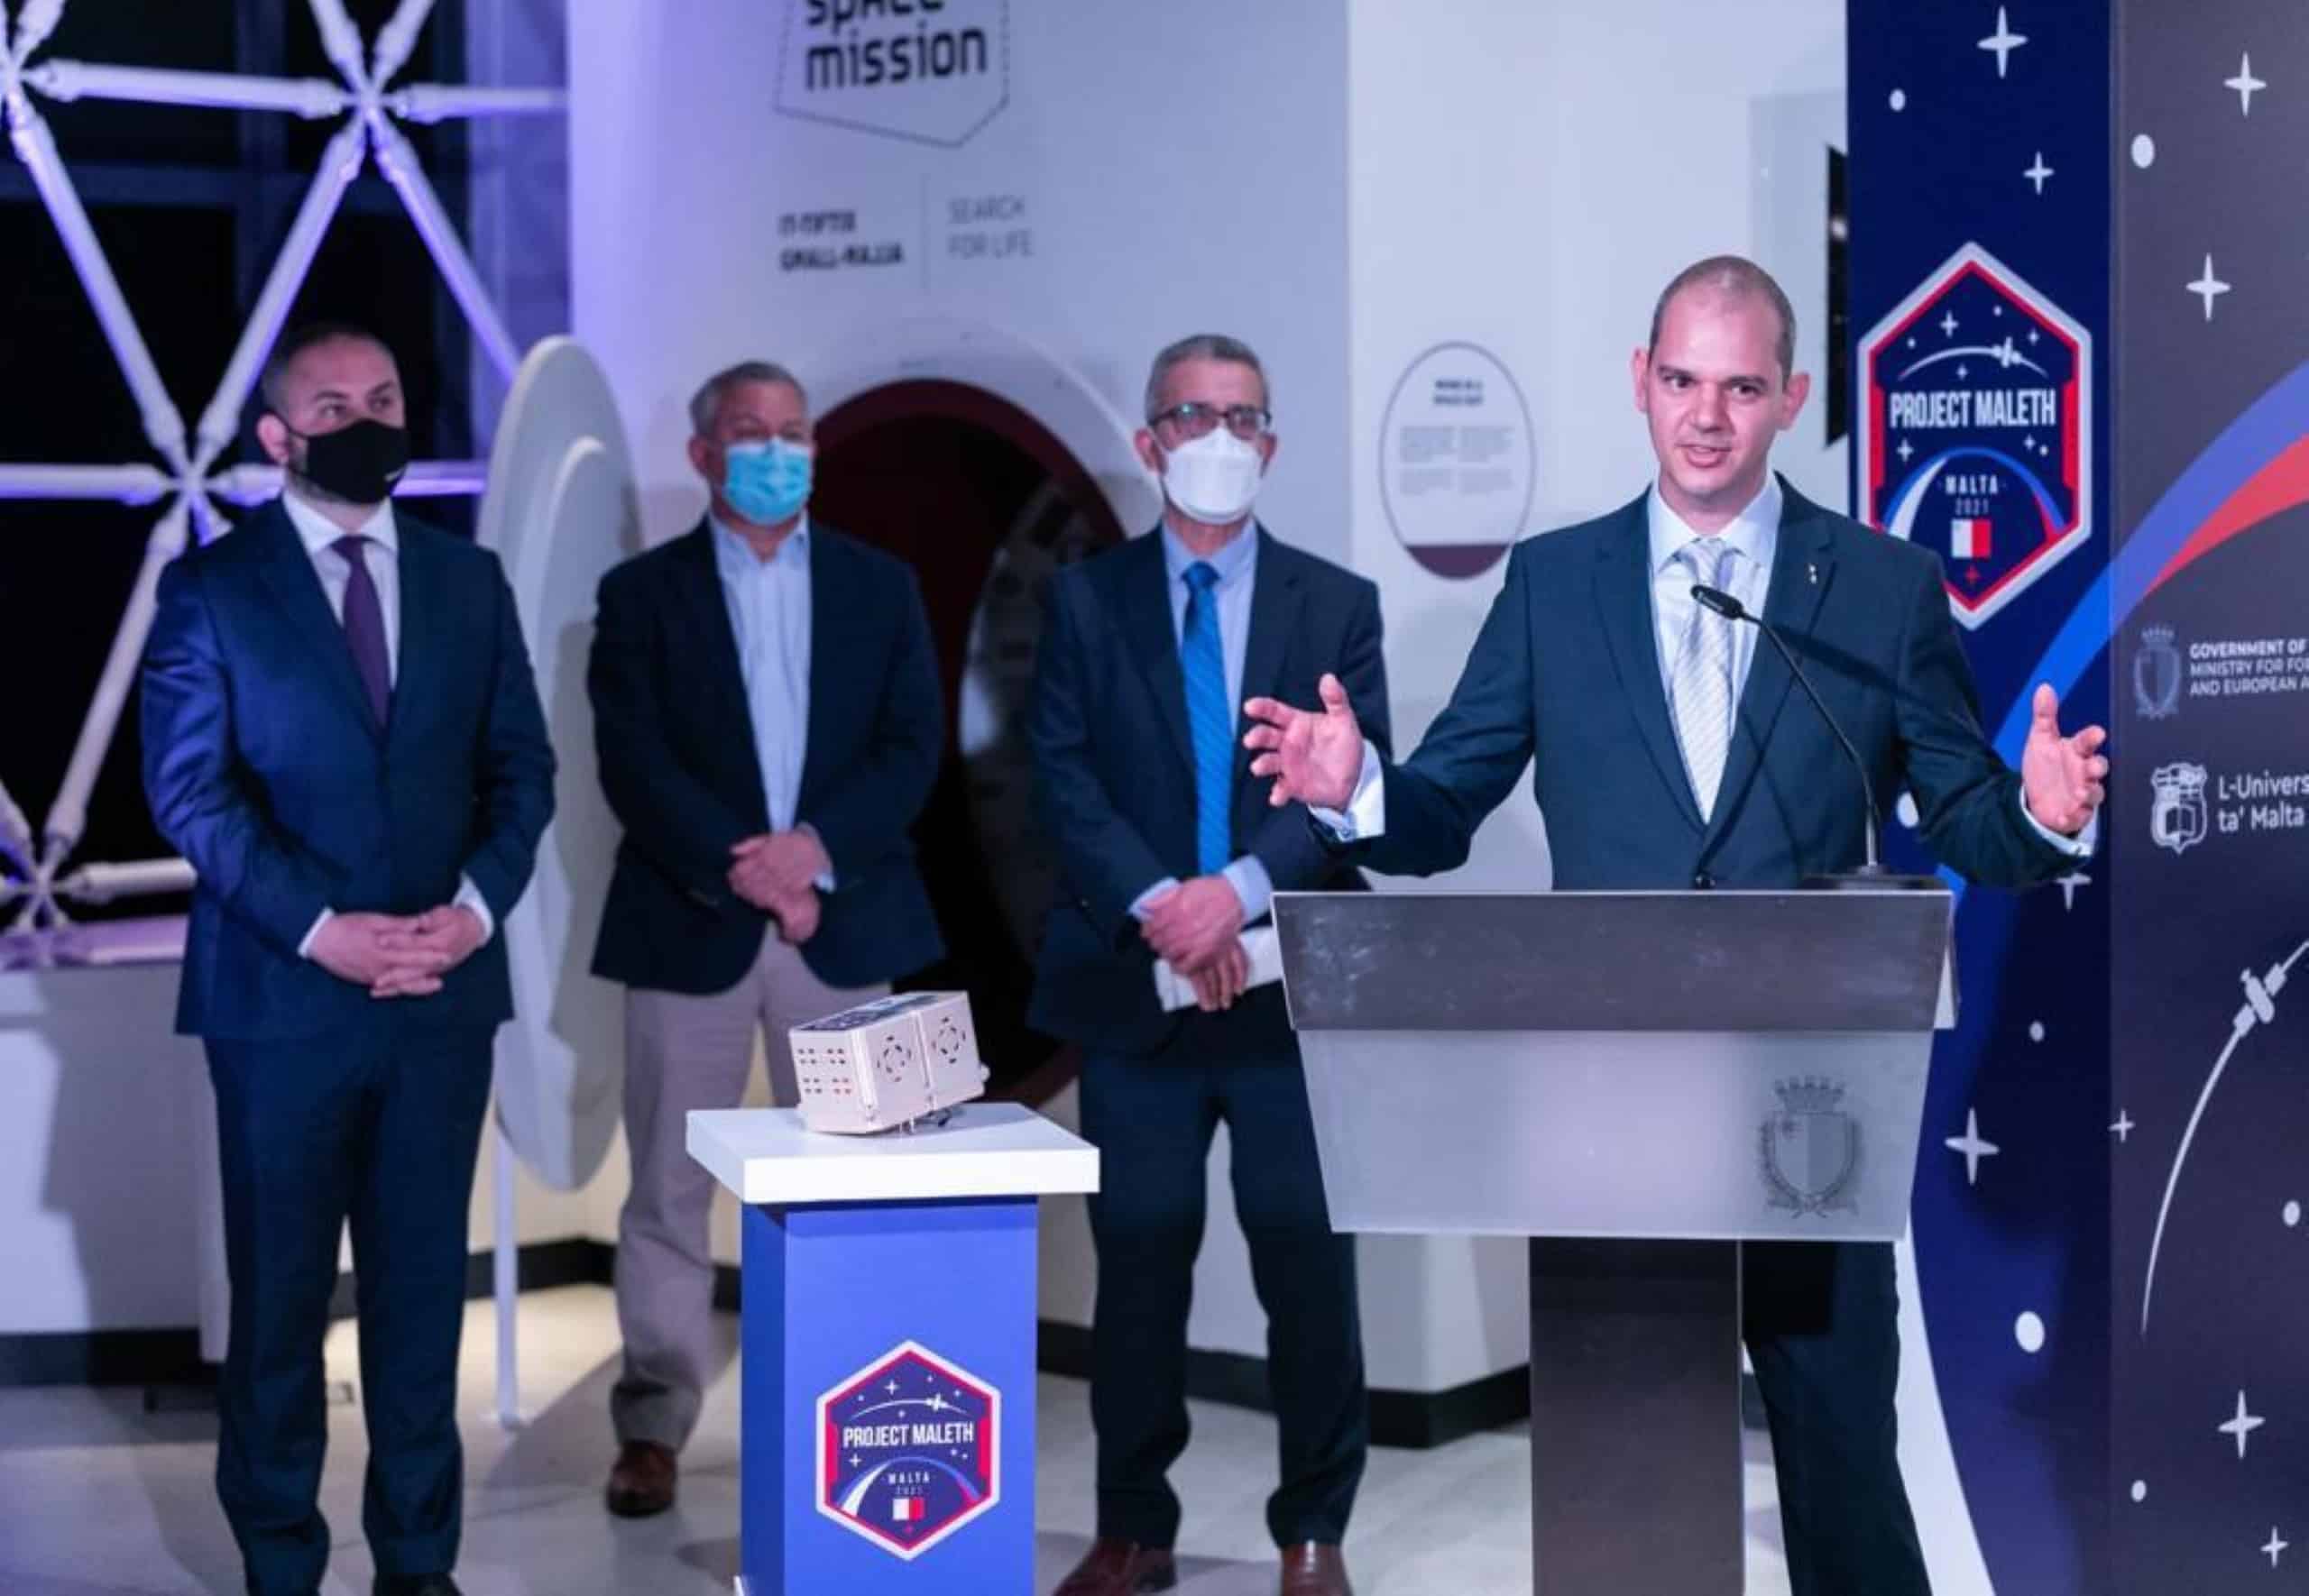 Malta to send a scientific experiment to the International Space Station